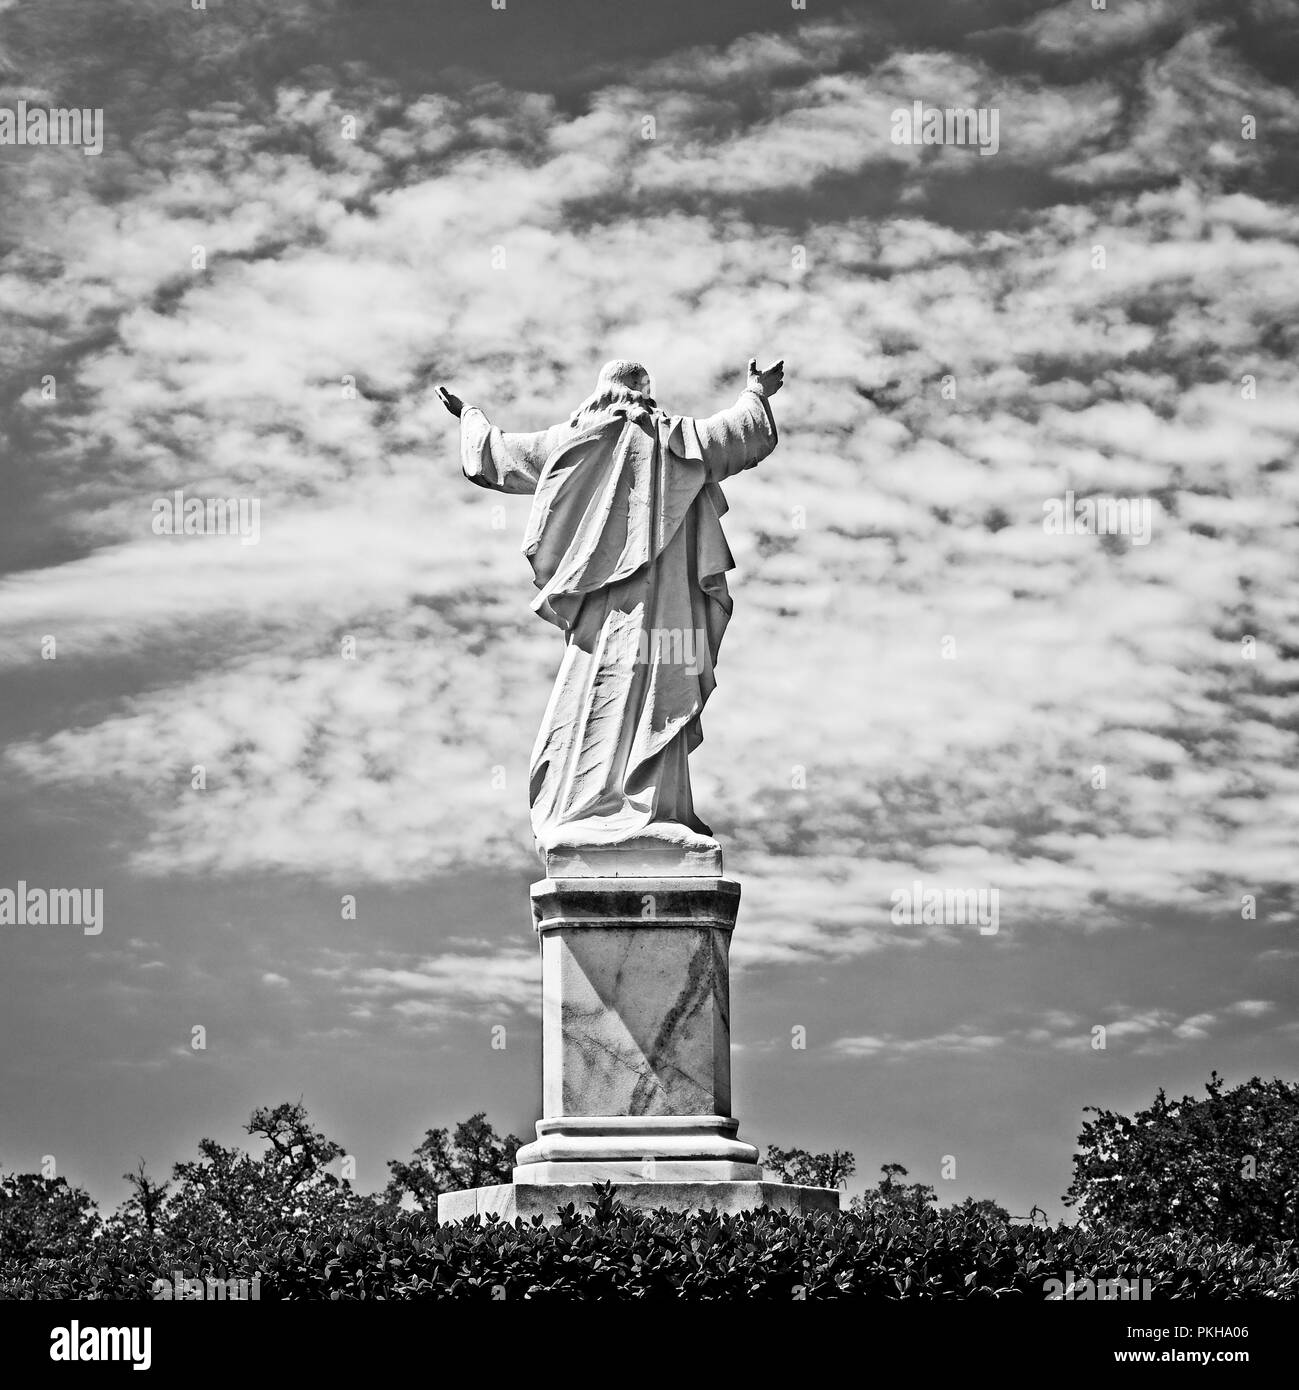 New Orleans, LA USA - May 9, 2018  -  Statue of Jesus with Hands Raised at Loyola University in B&W Stock Photo